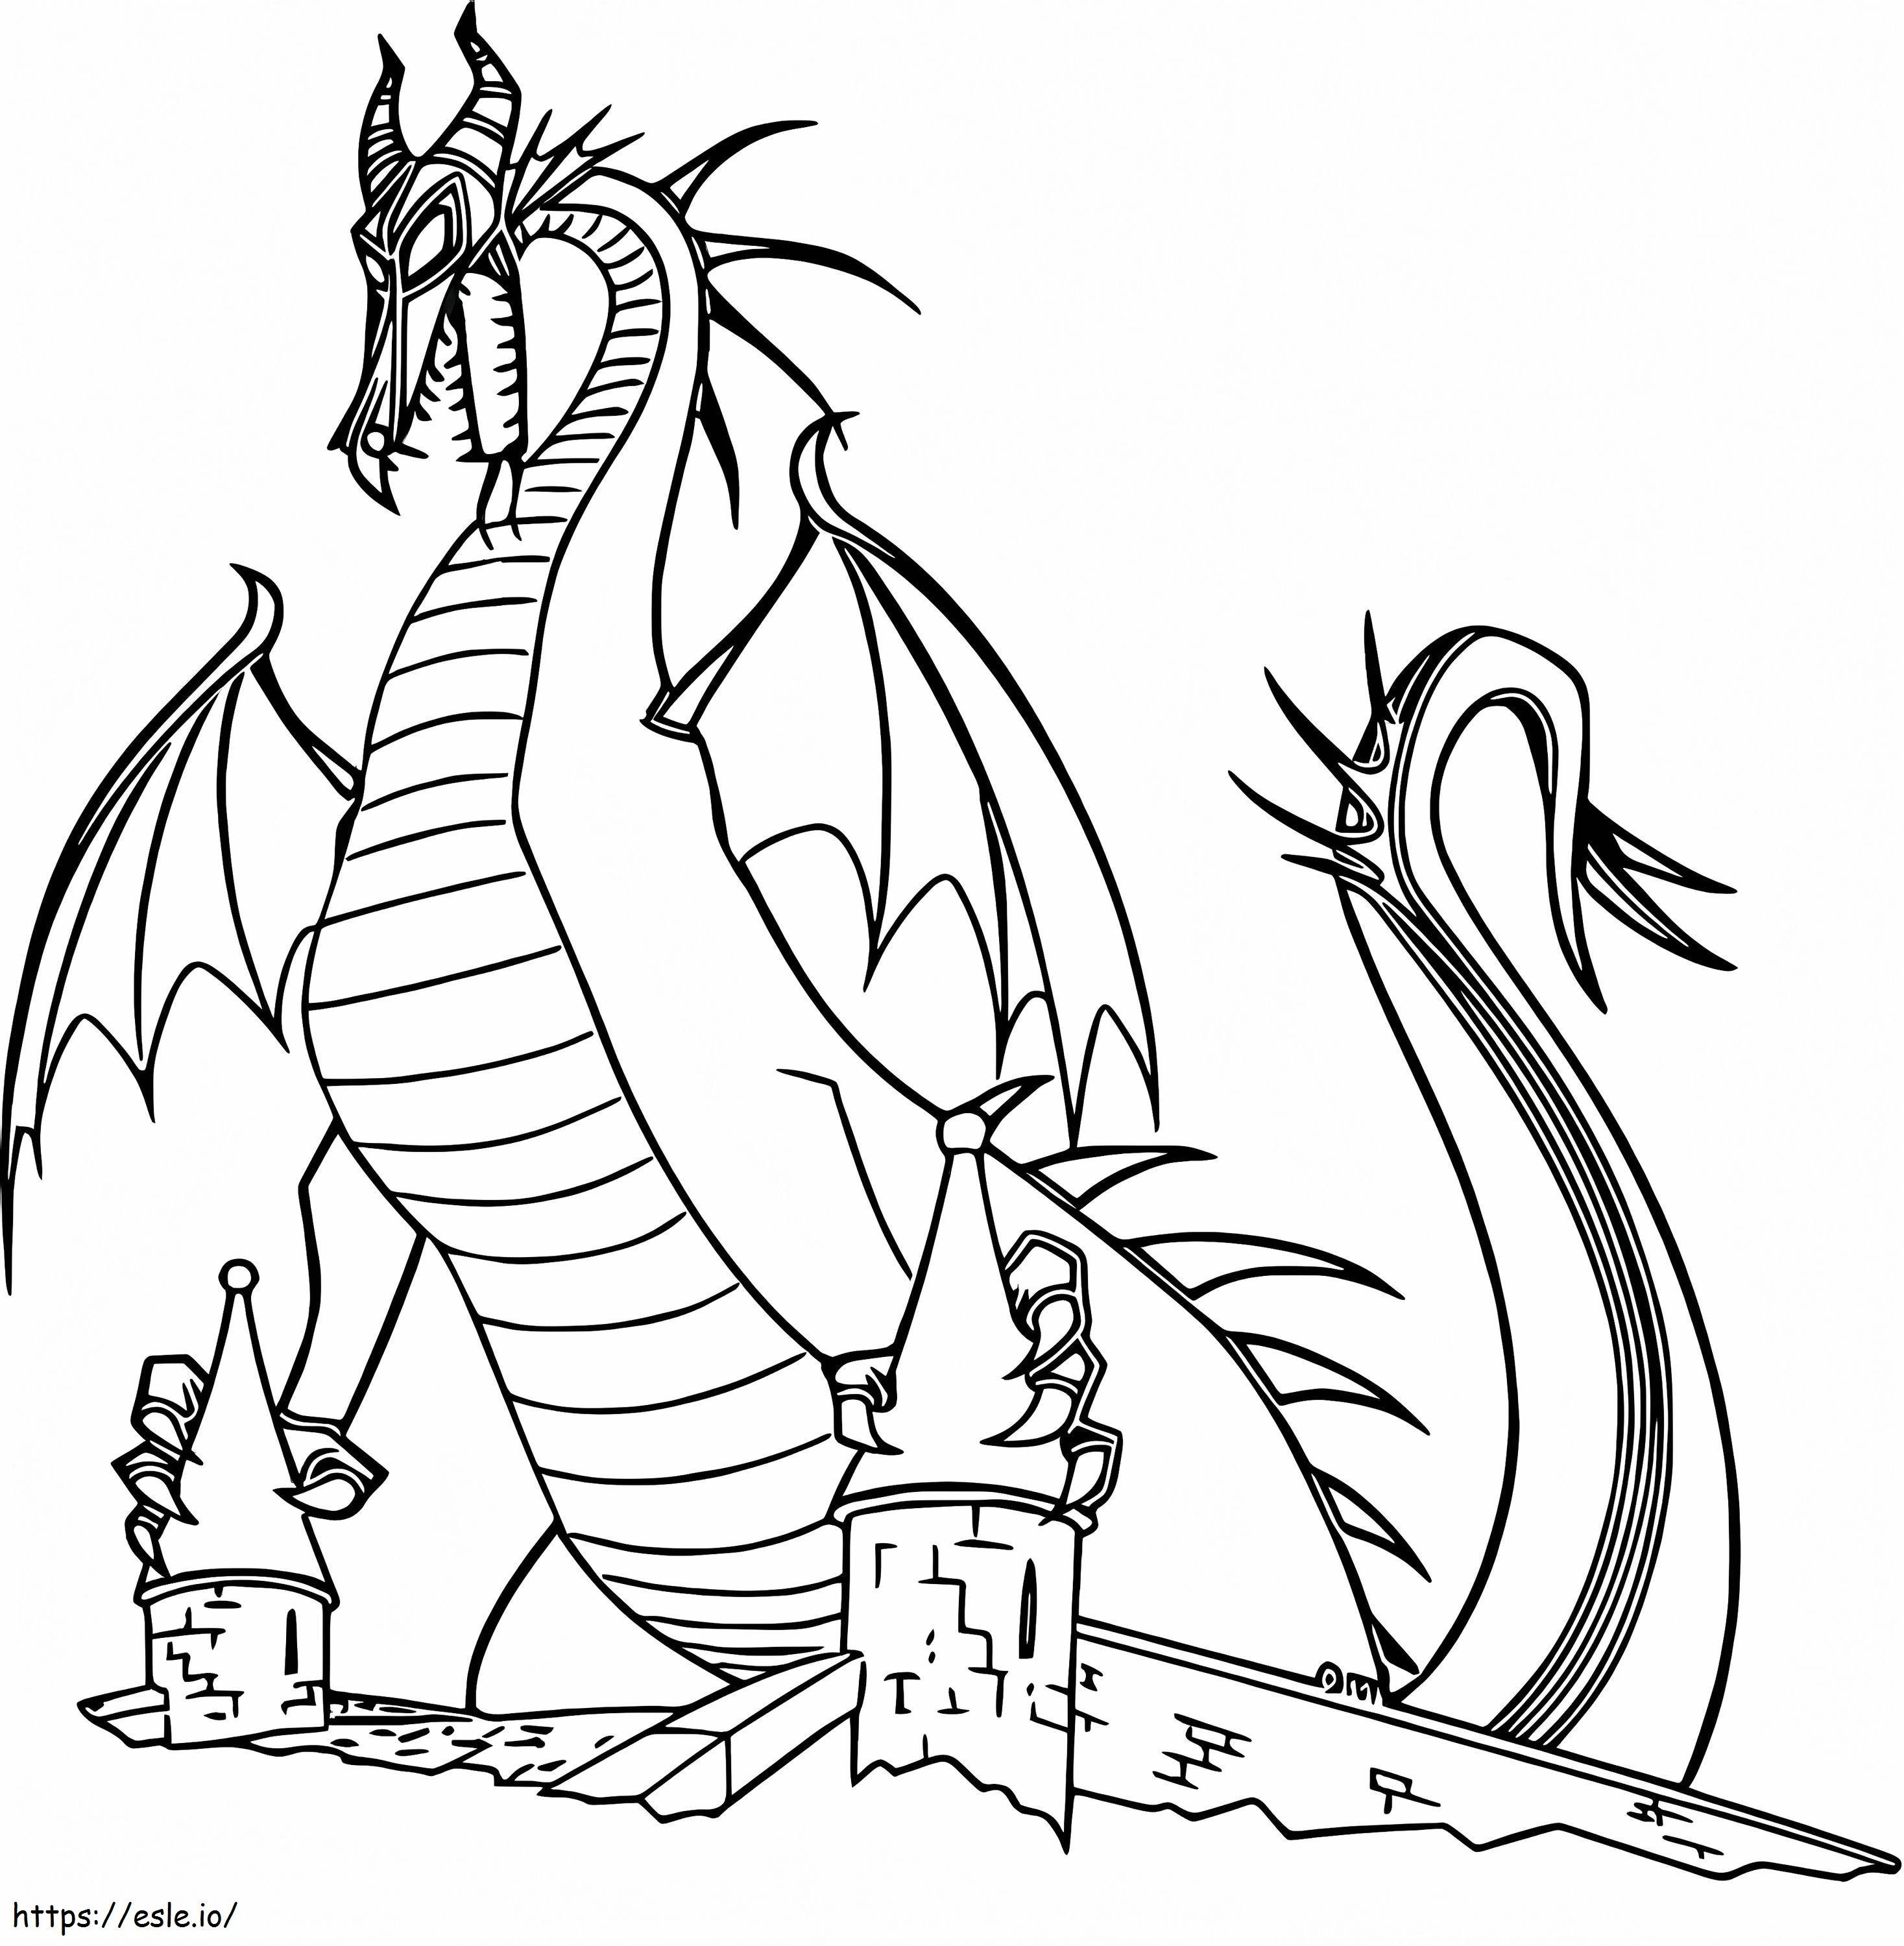 Evil Dragon coloring page